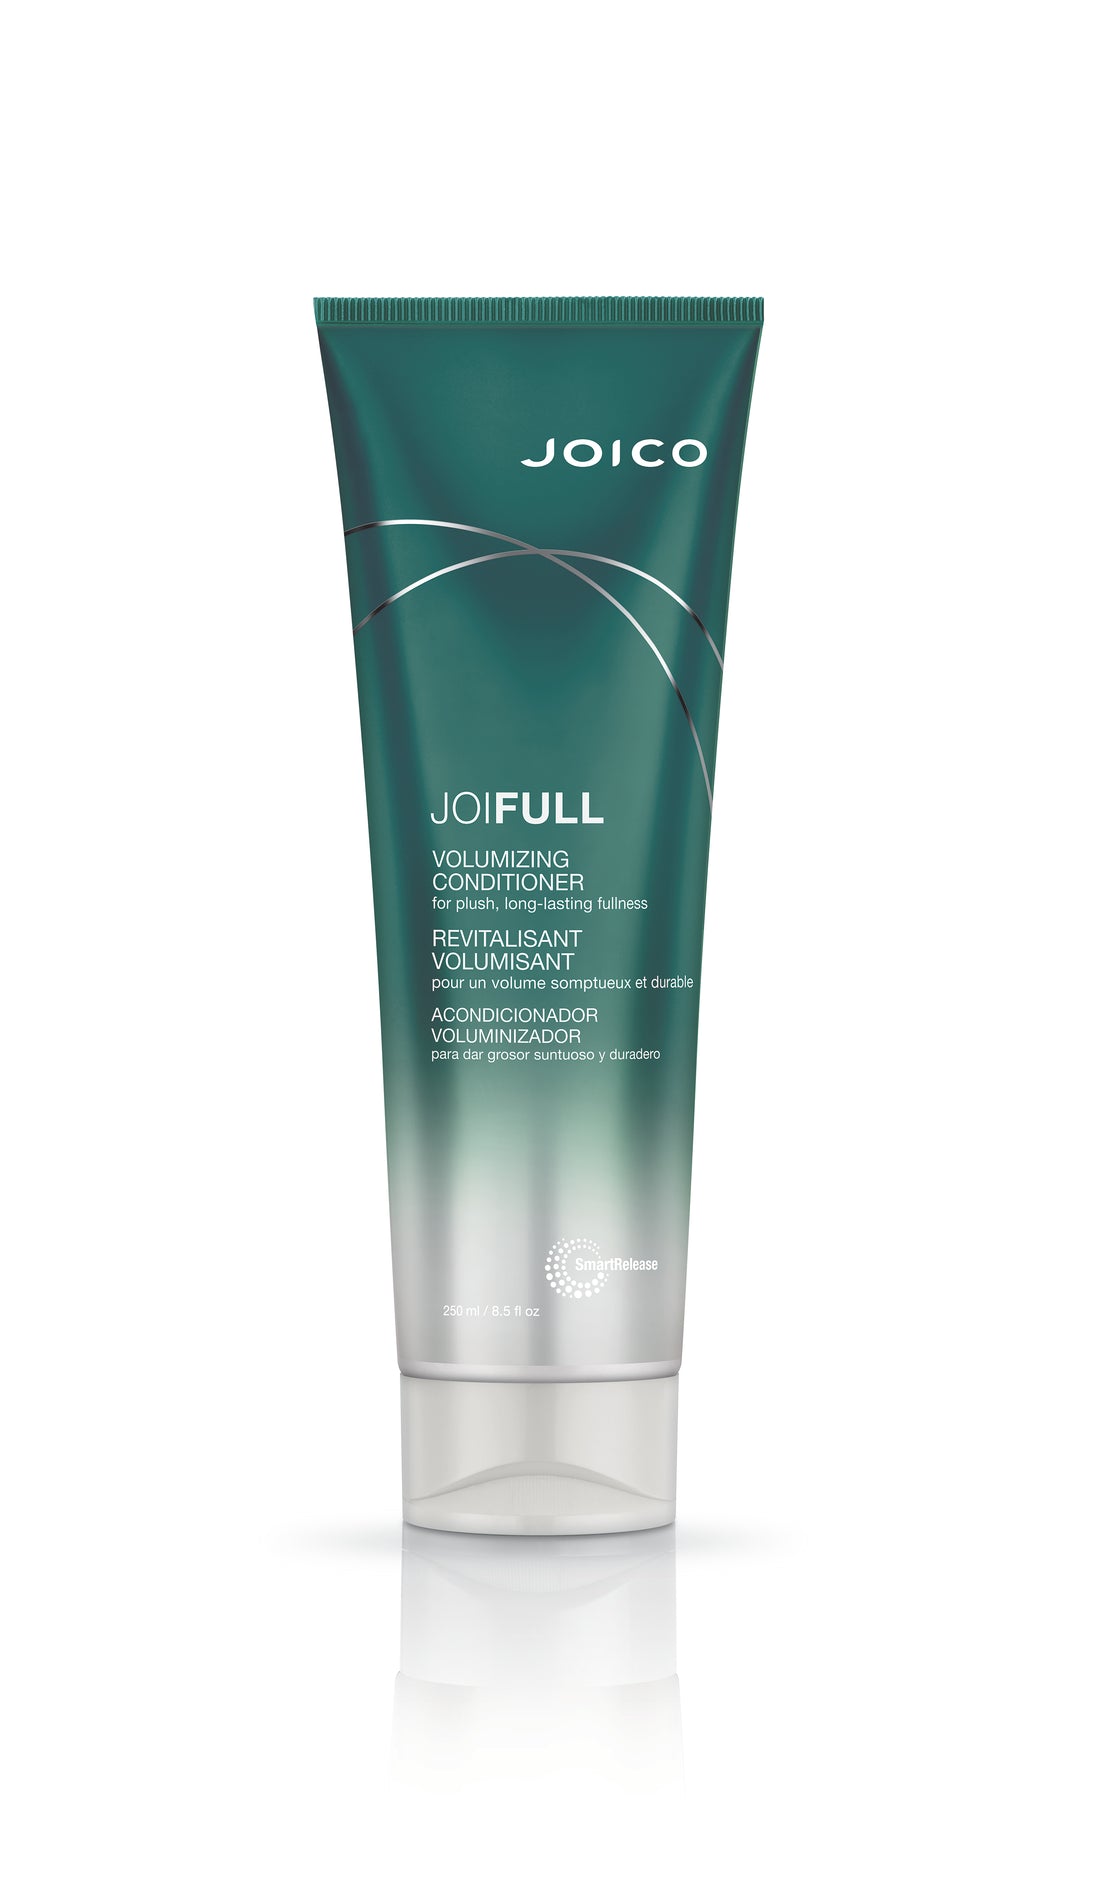 Joico JoiFULL Conditioner